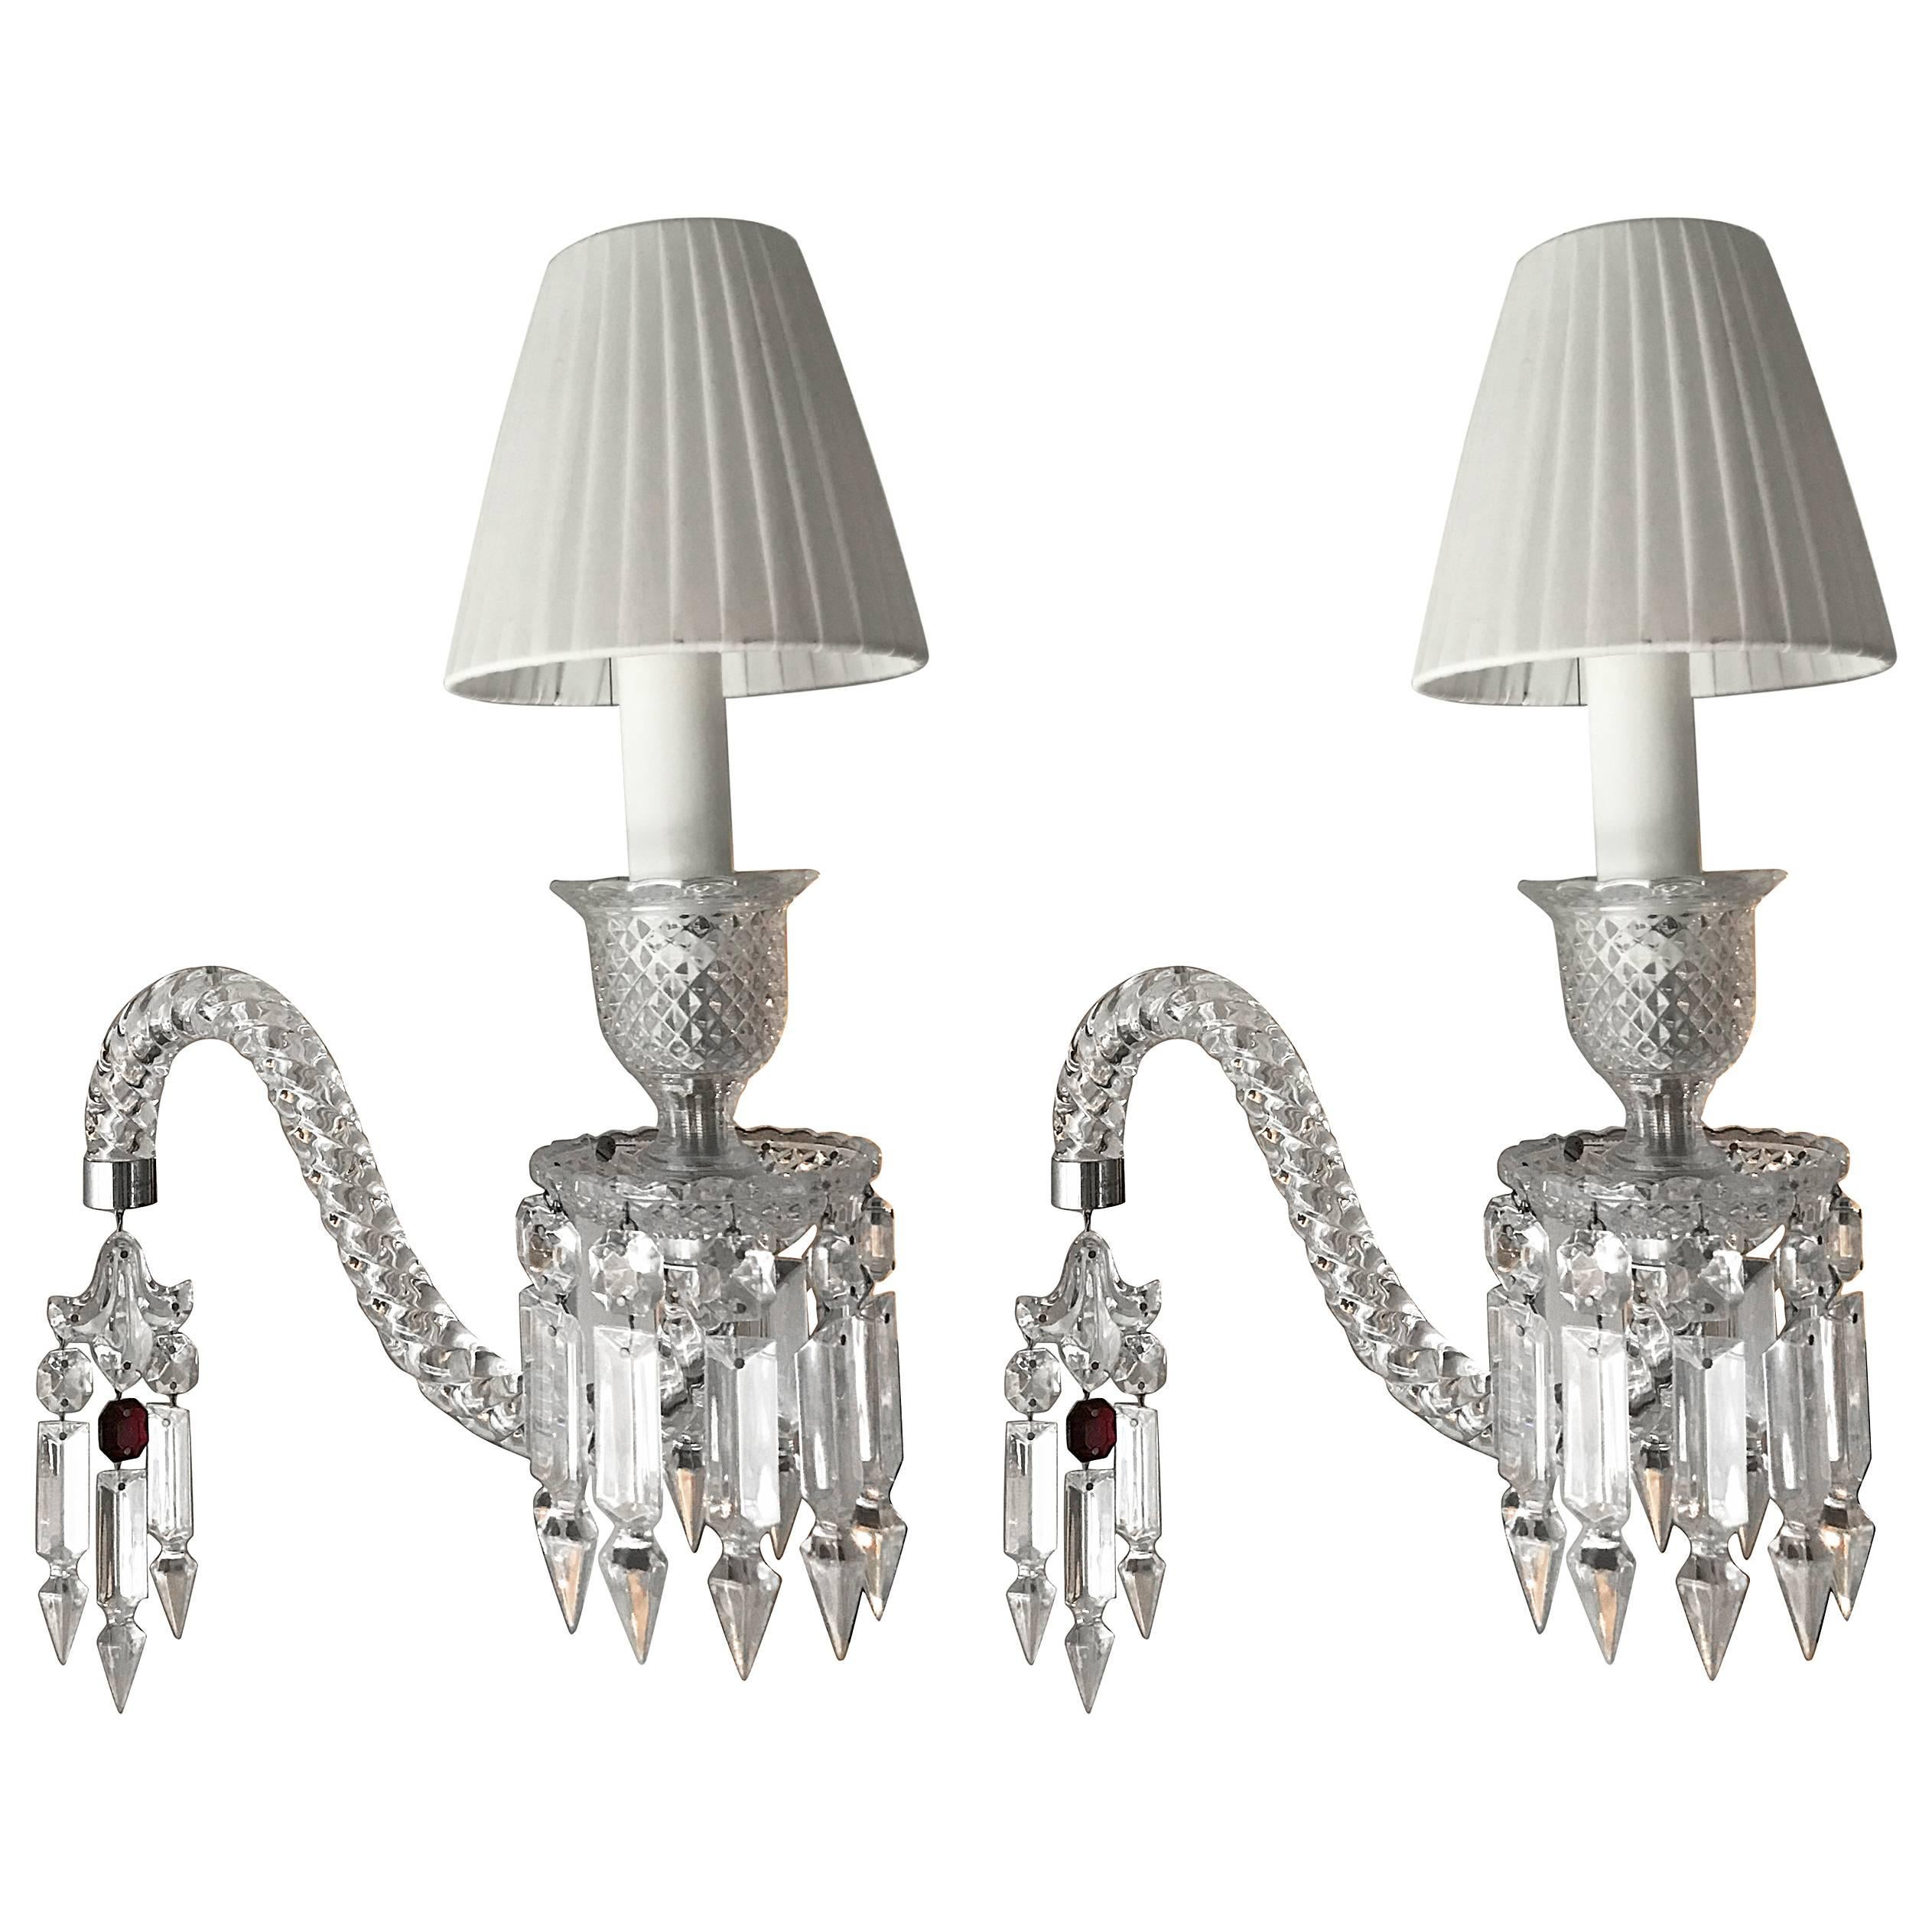 Pair of Baccarat Crystal Fantome Hanging Sconces